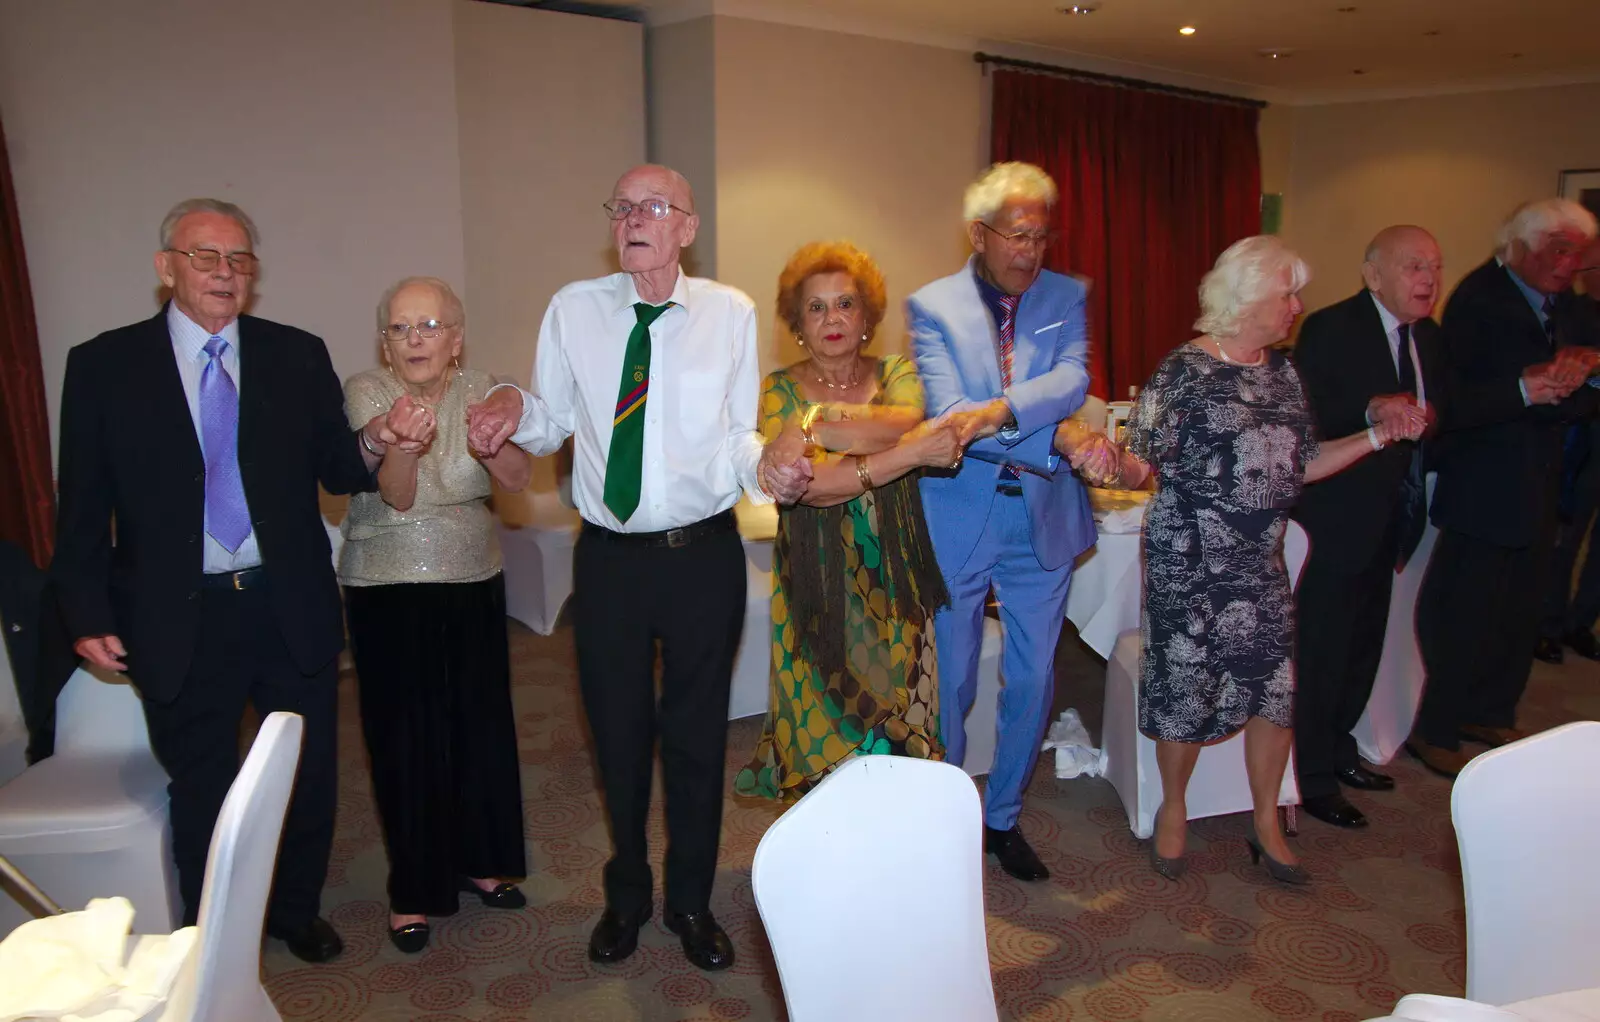 More arm swinging, from Kenilworth Castle and the 69th Entry Reunion Dinner, Stratford, Warwickshire - 14th September 2019